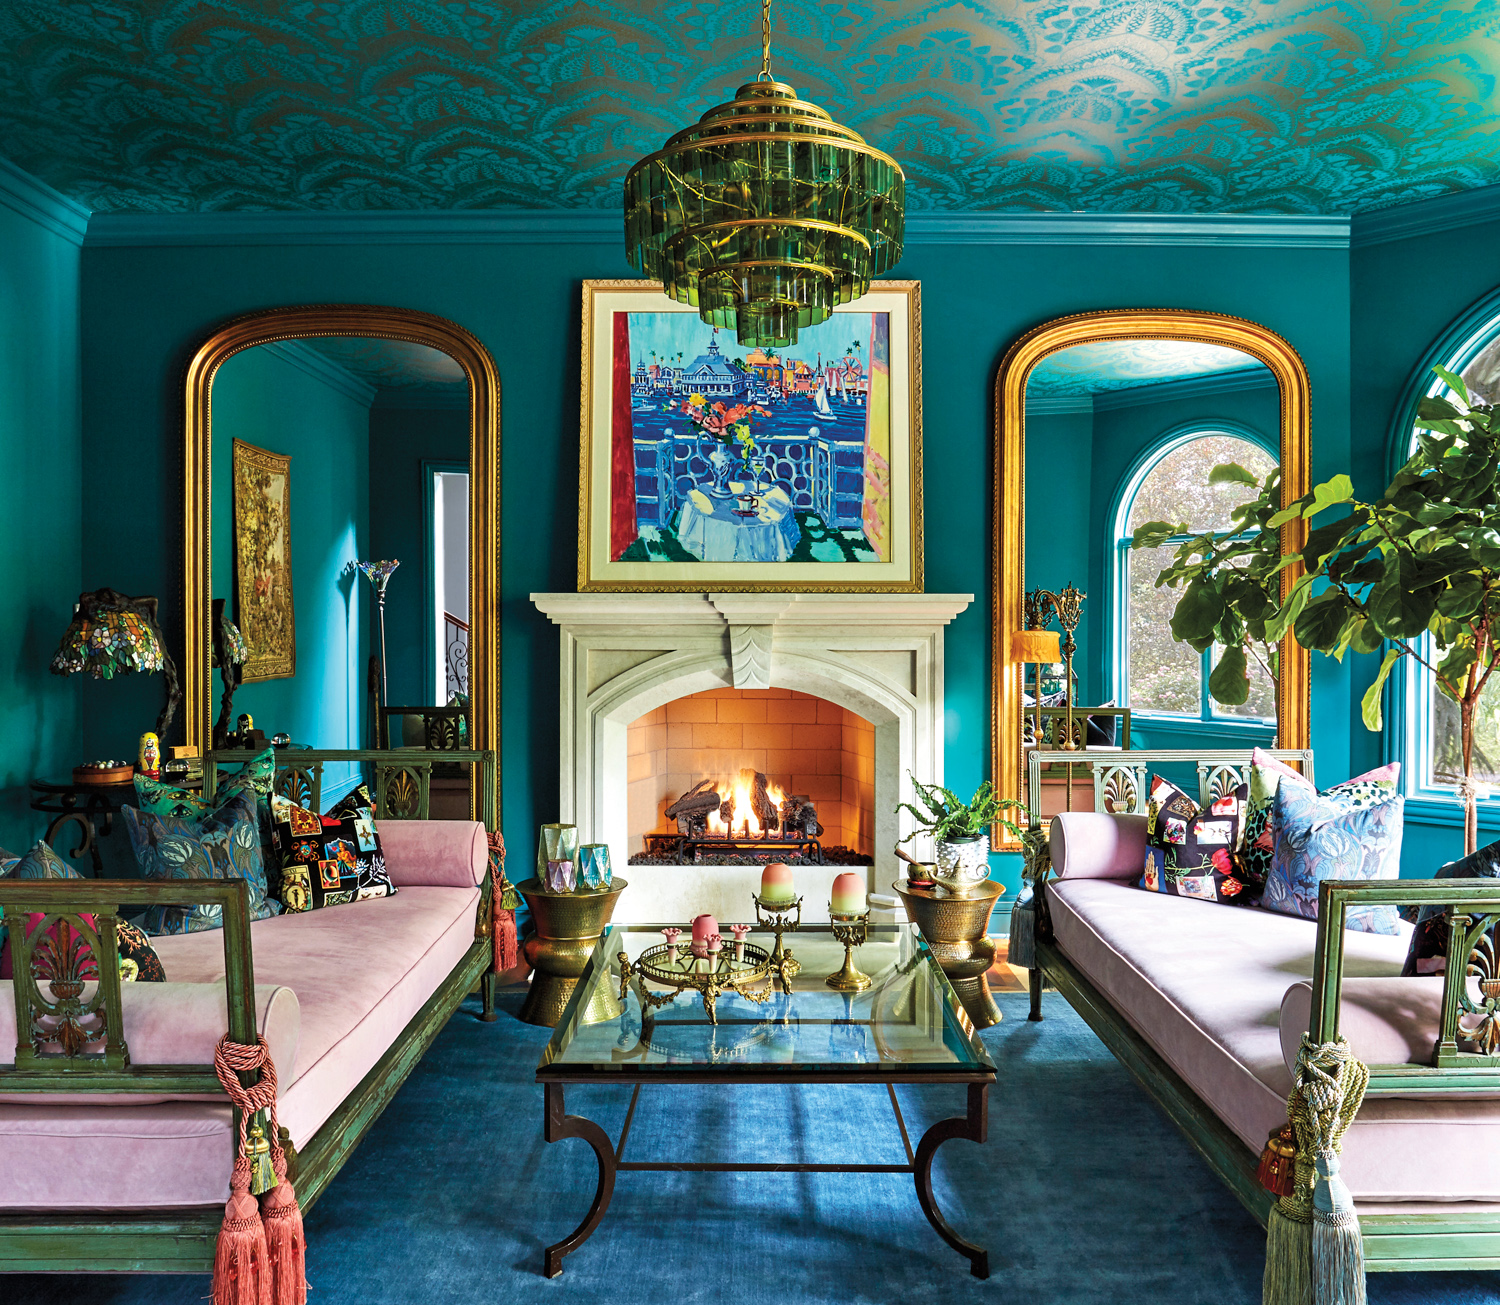 Two pink and green daybeds sit around a fireplace in an ornate teal room with brass accents. RED Winner.